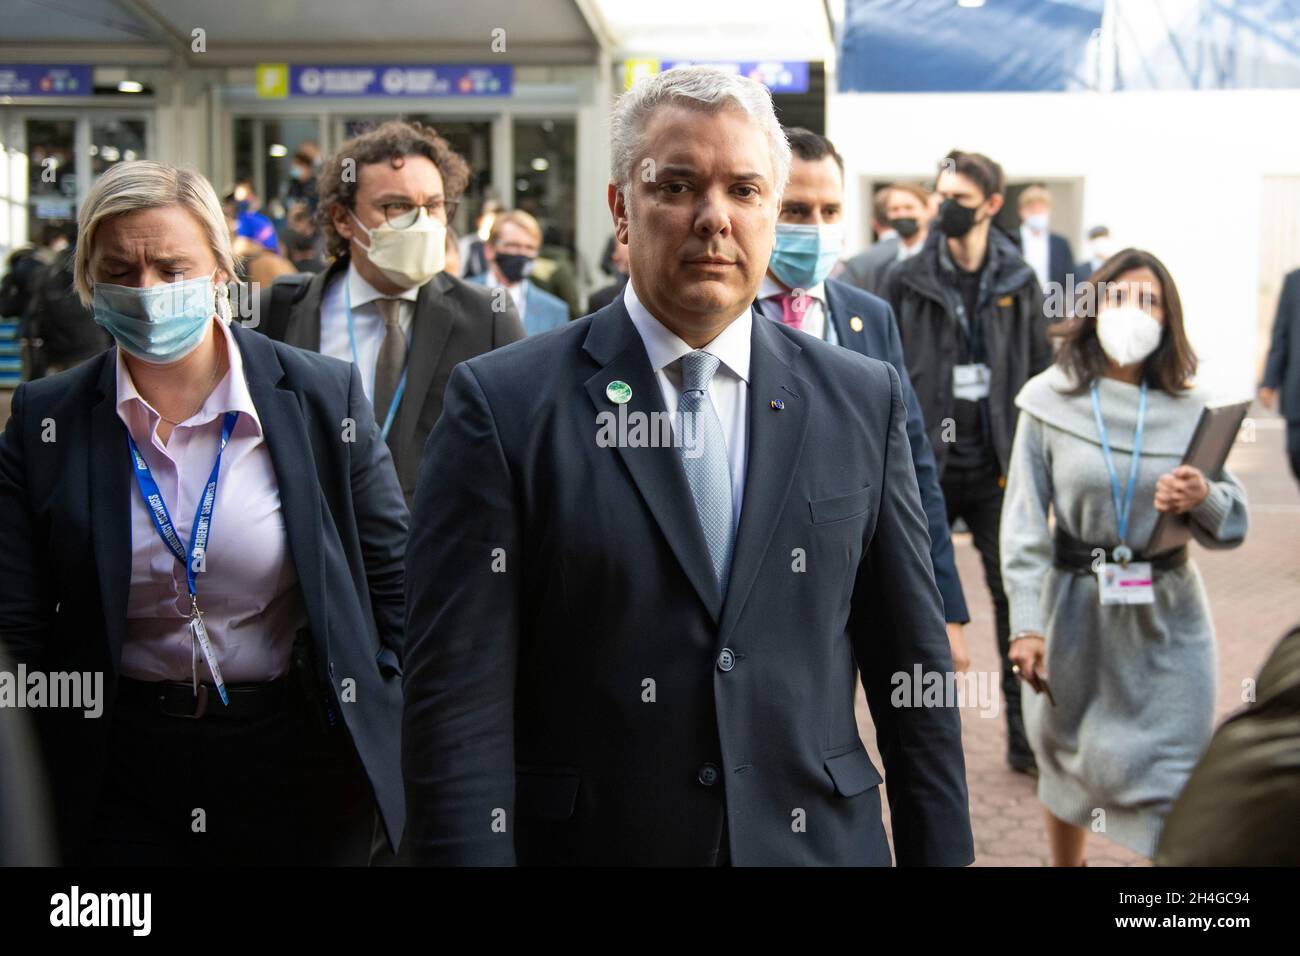 Glasgow, Scotland, UK. 2nd Nov, 2021. PICTURED: Iván Duque Márquez, Prime Minister of Columbia, seen at the COP26 Climate Change Conference in Glasgow this afternoon. Credit: Colin Fisher/Alamy Live News Stock Photo